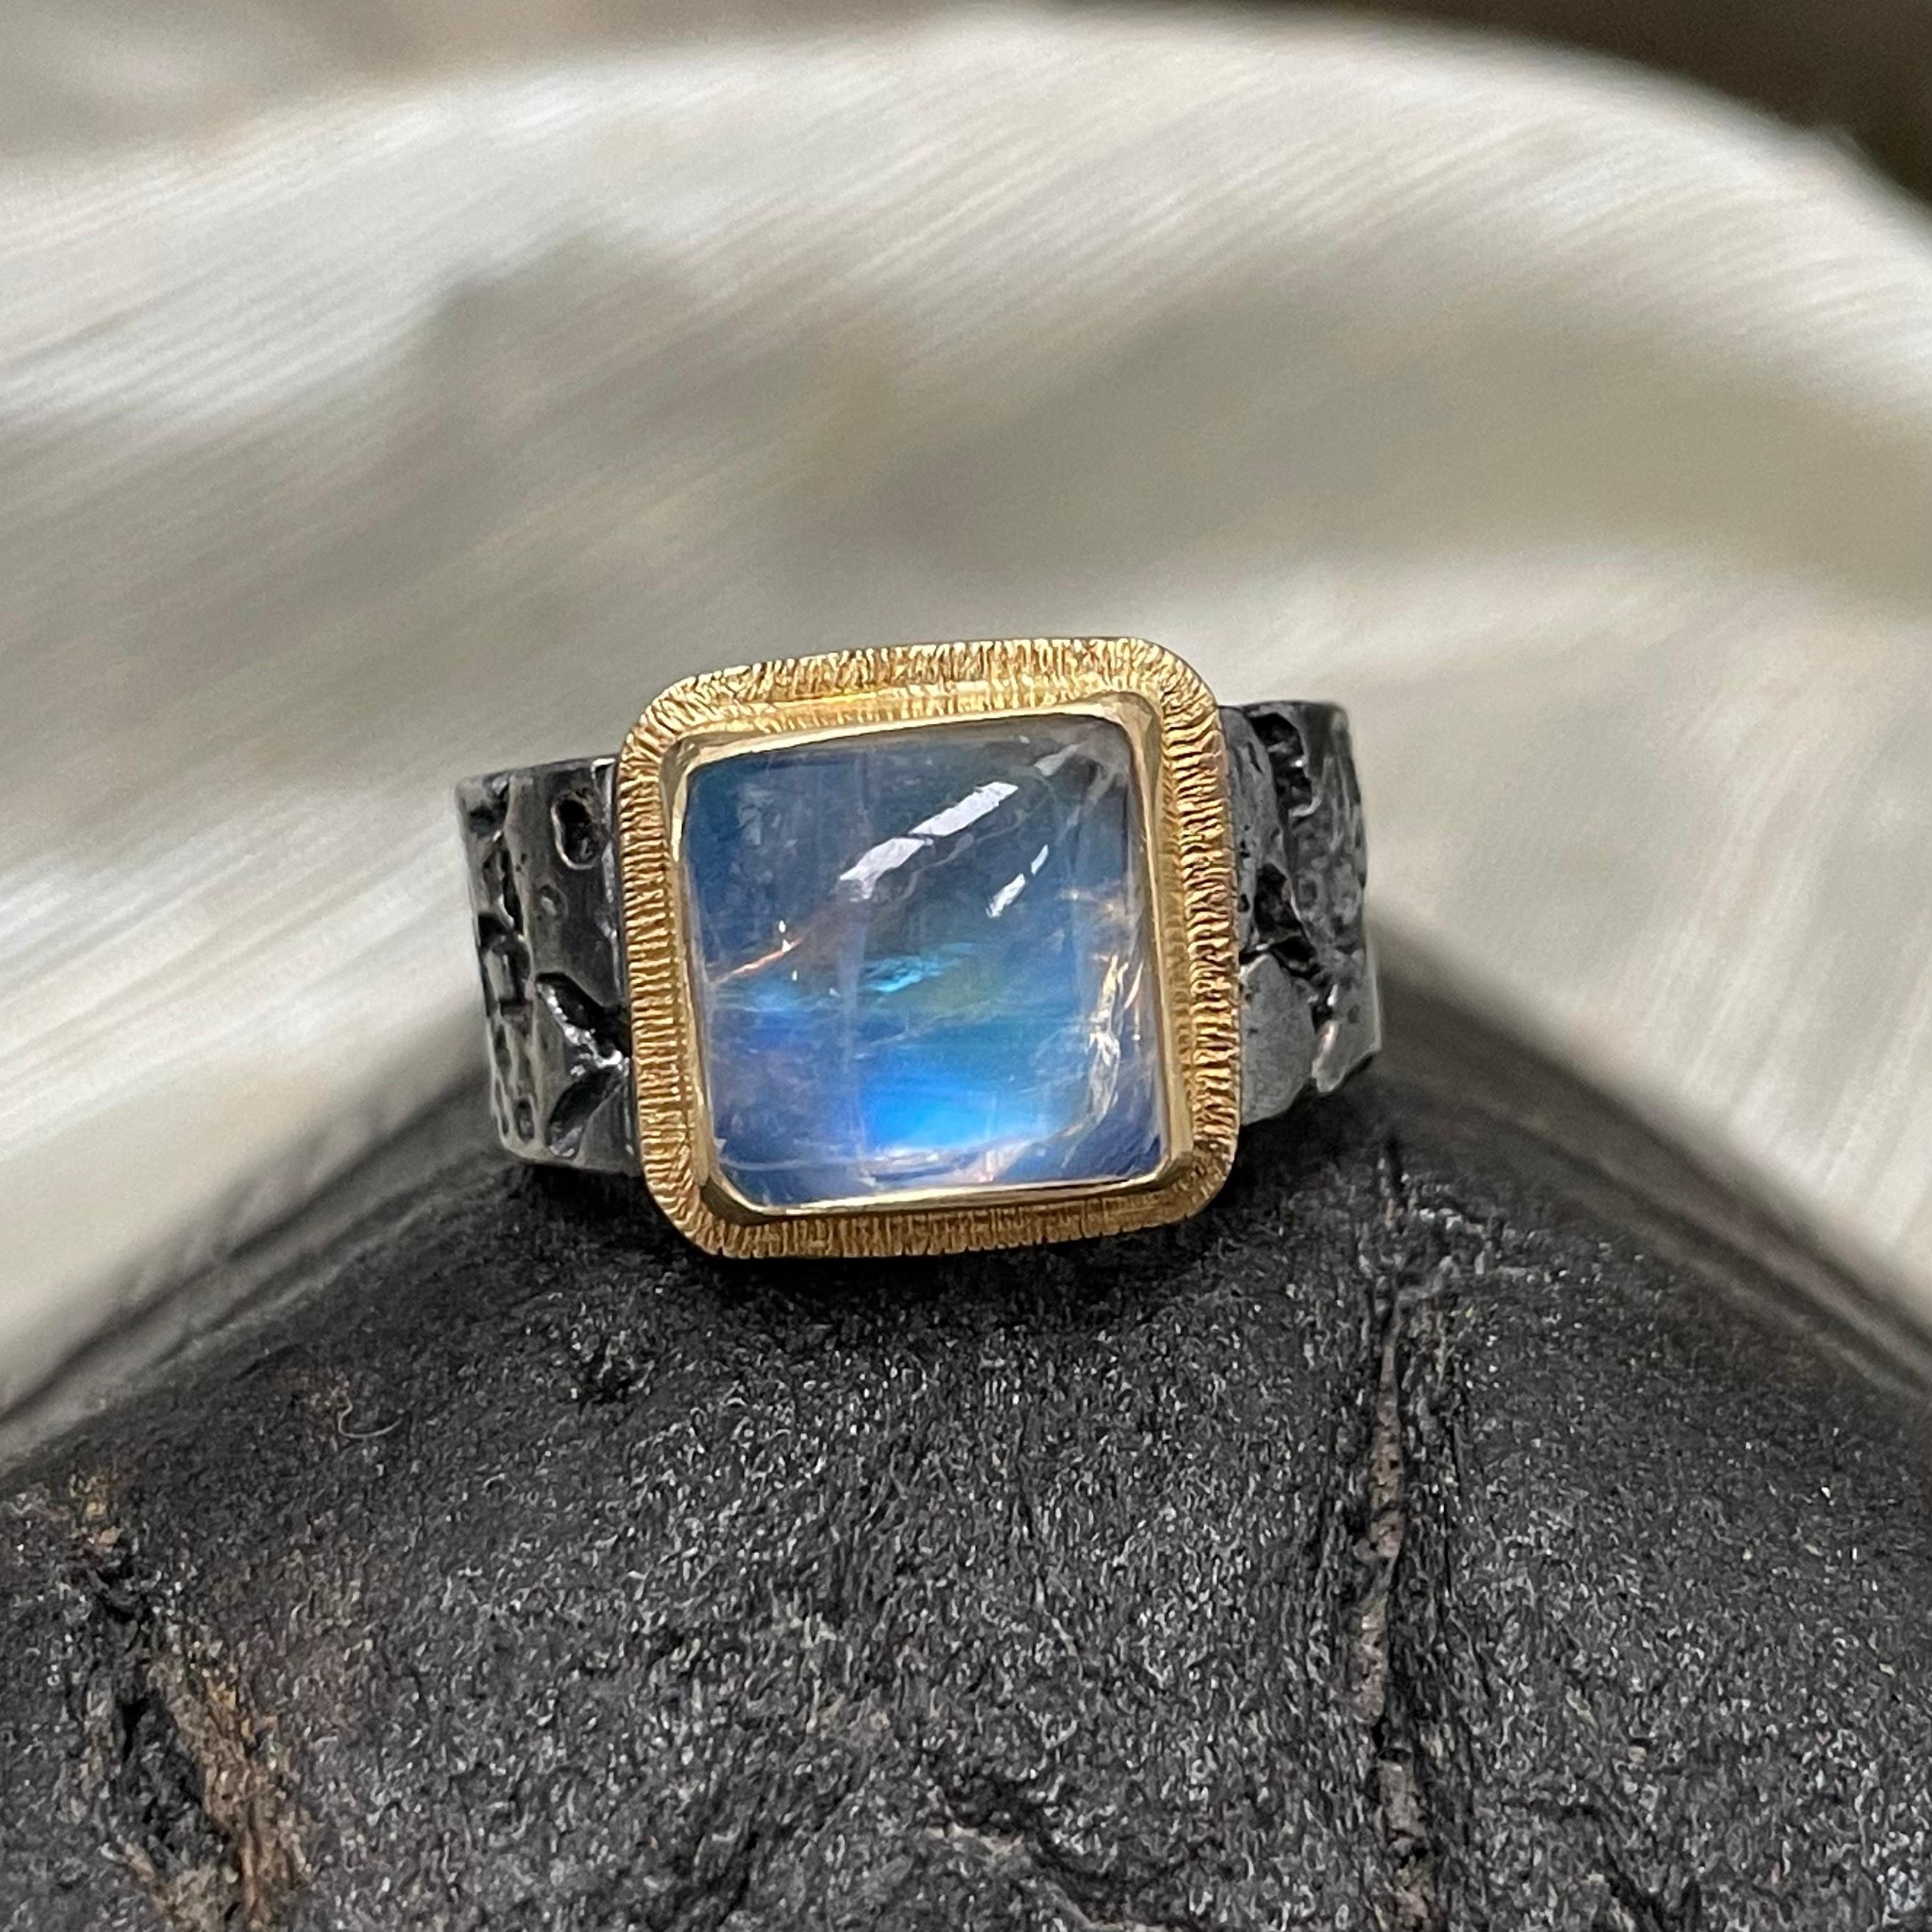 A beautiful 10mm square cushion rainbow moonstone is set atop an organic textured oxidized sterling slightly tapered flattish band in this juxtaposition of colors and textures.  The flashing blue of the moonstone contrasts beautifully with the